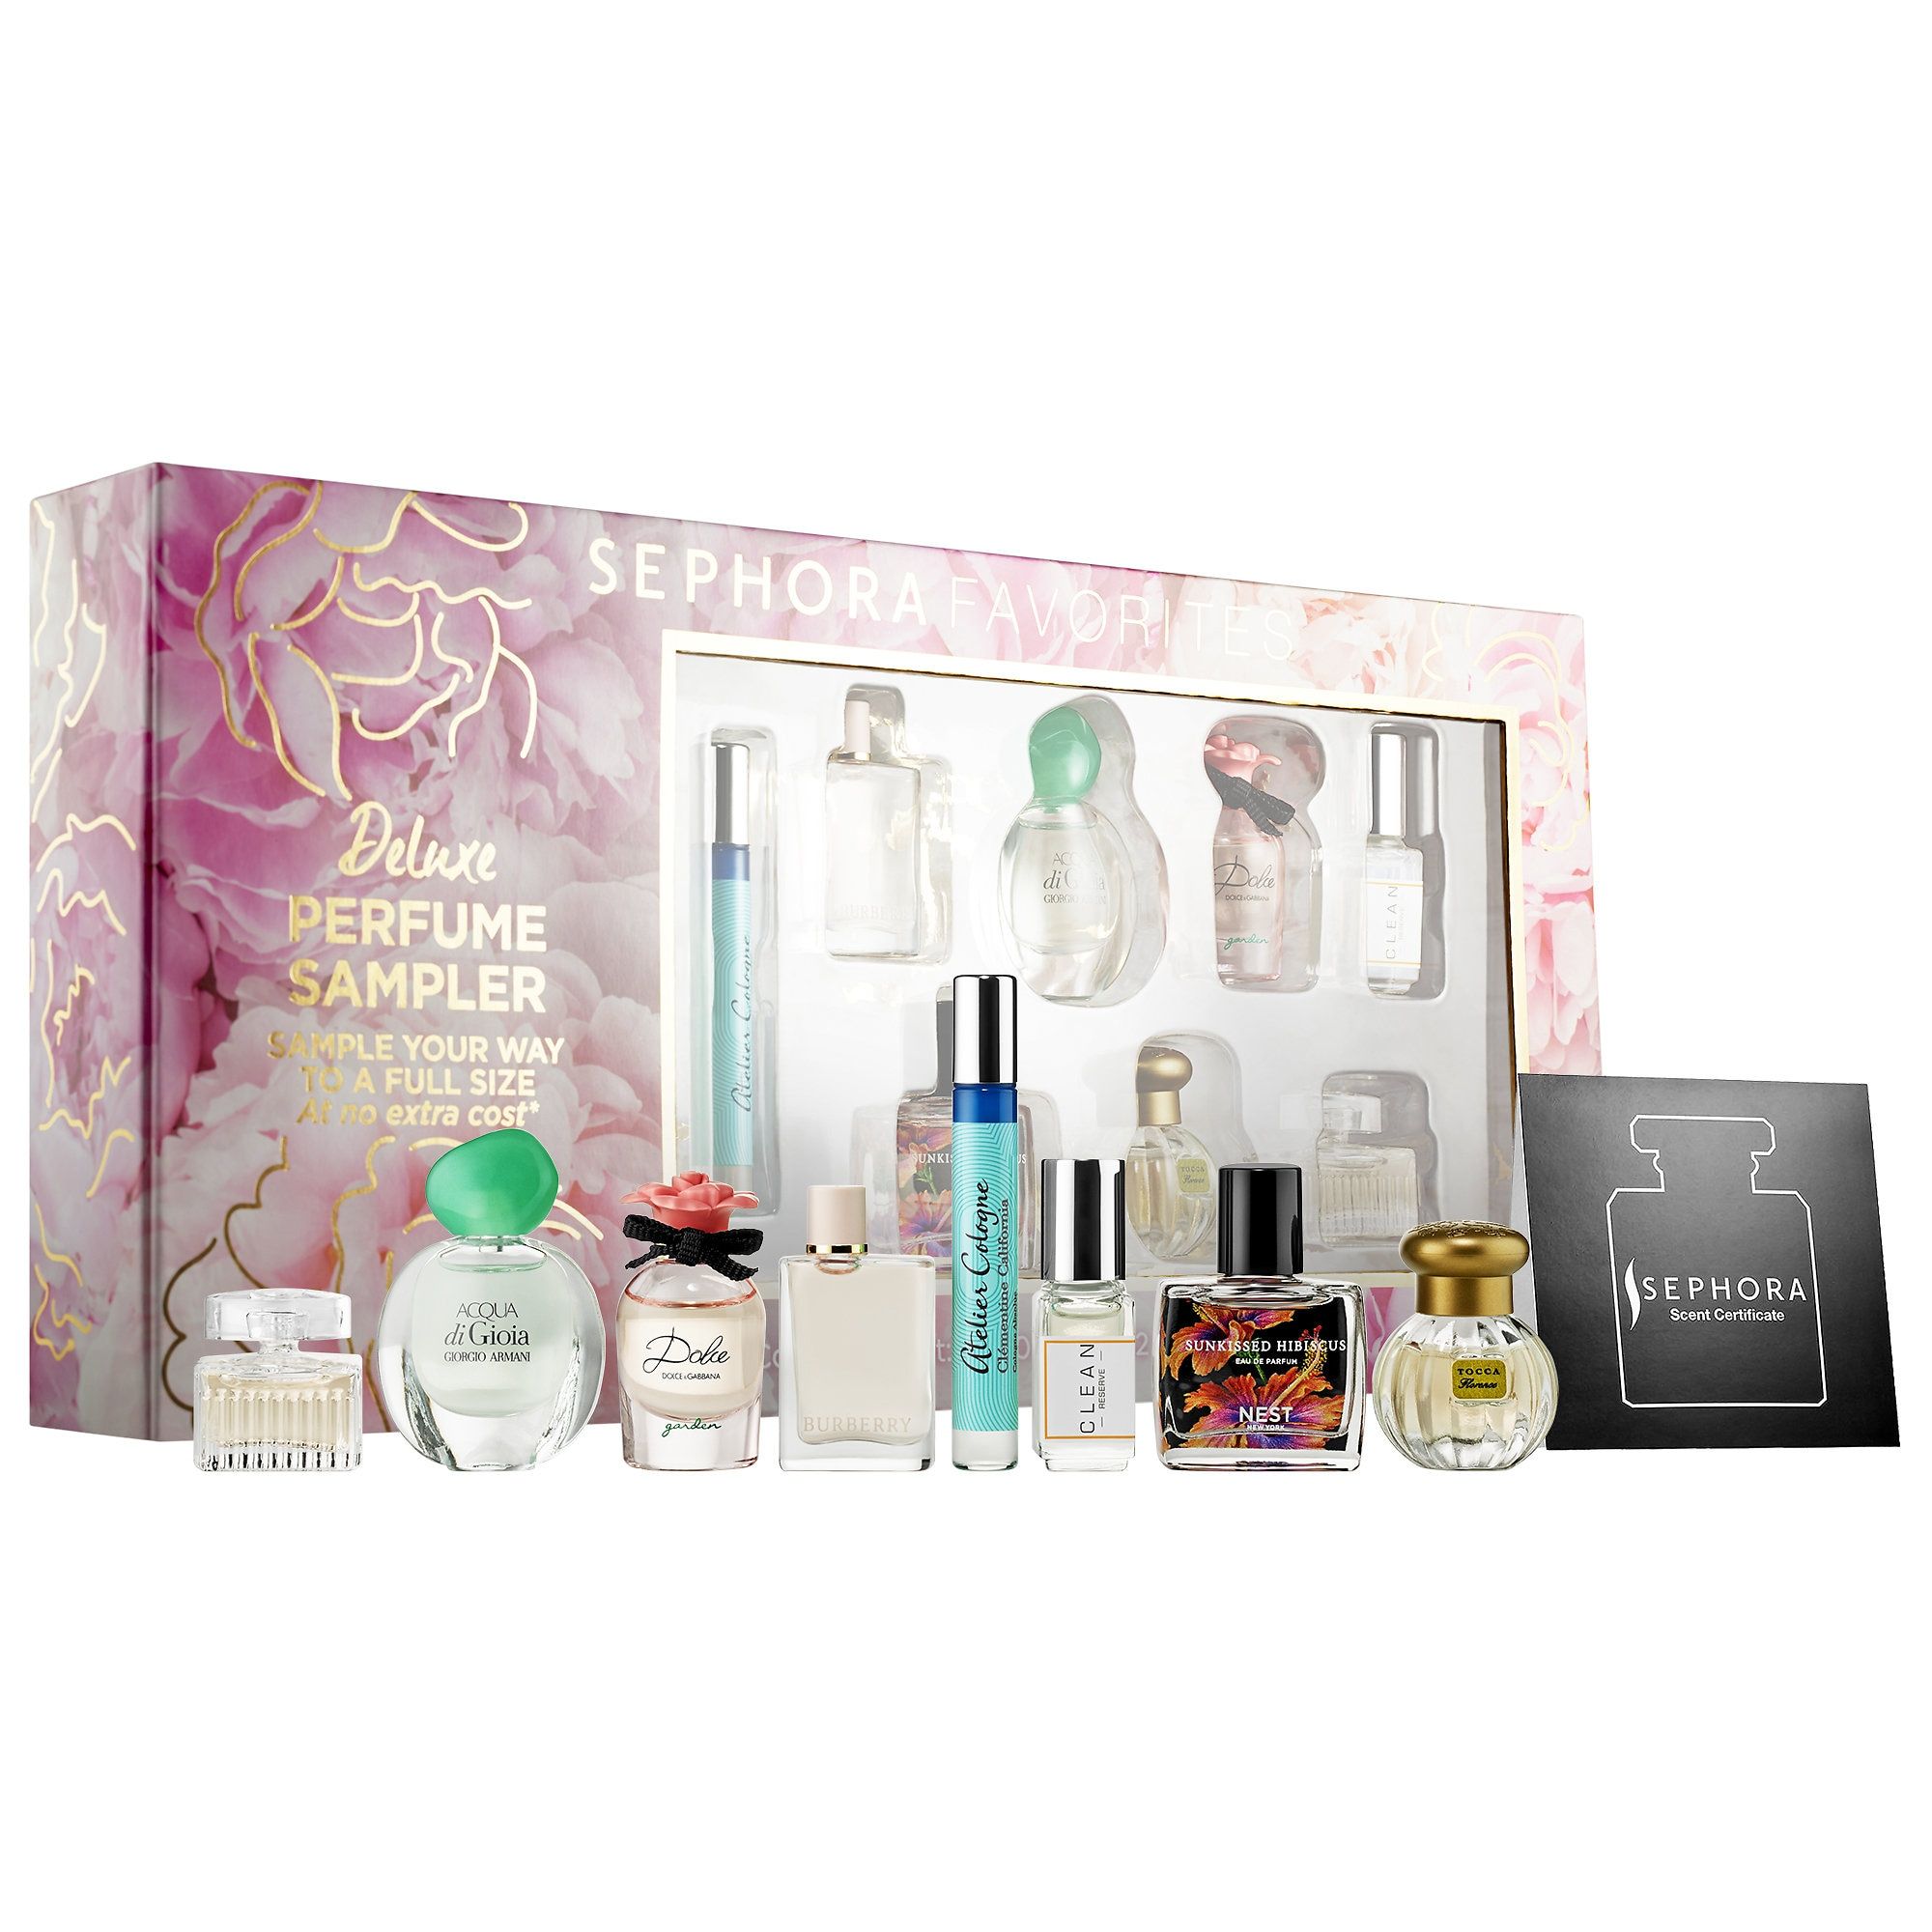 women's cologne gift sets